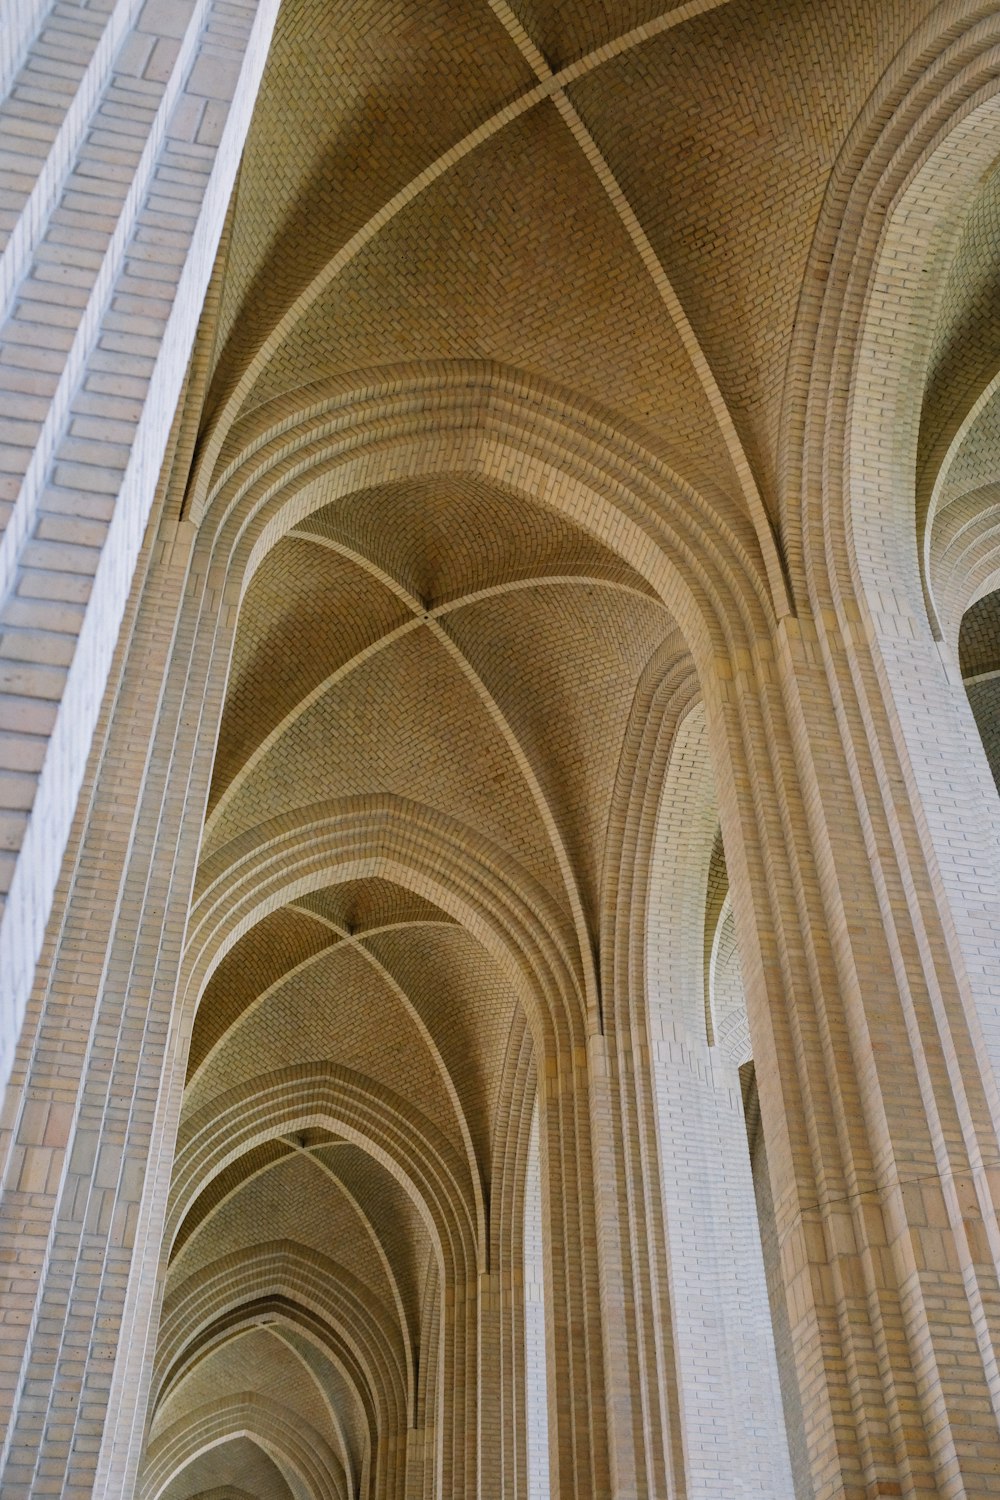 a large arched ceiling